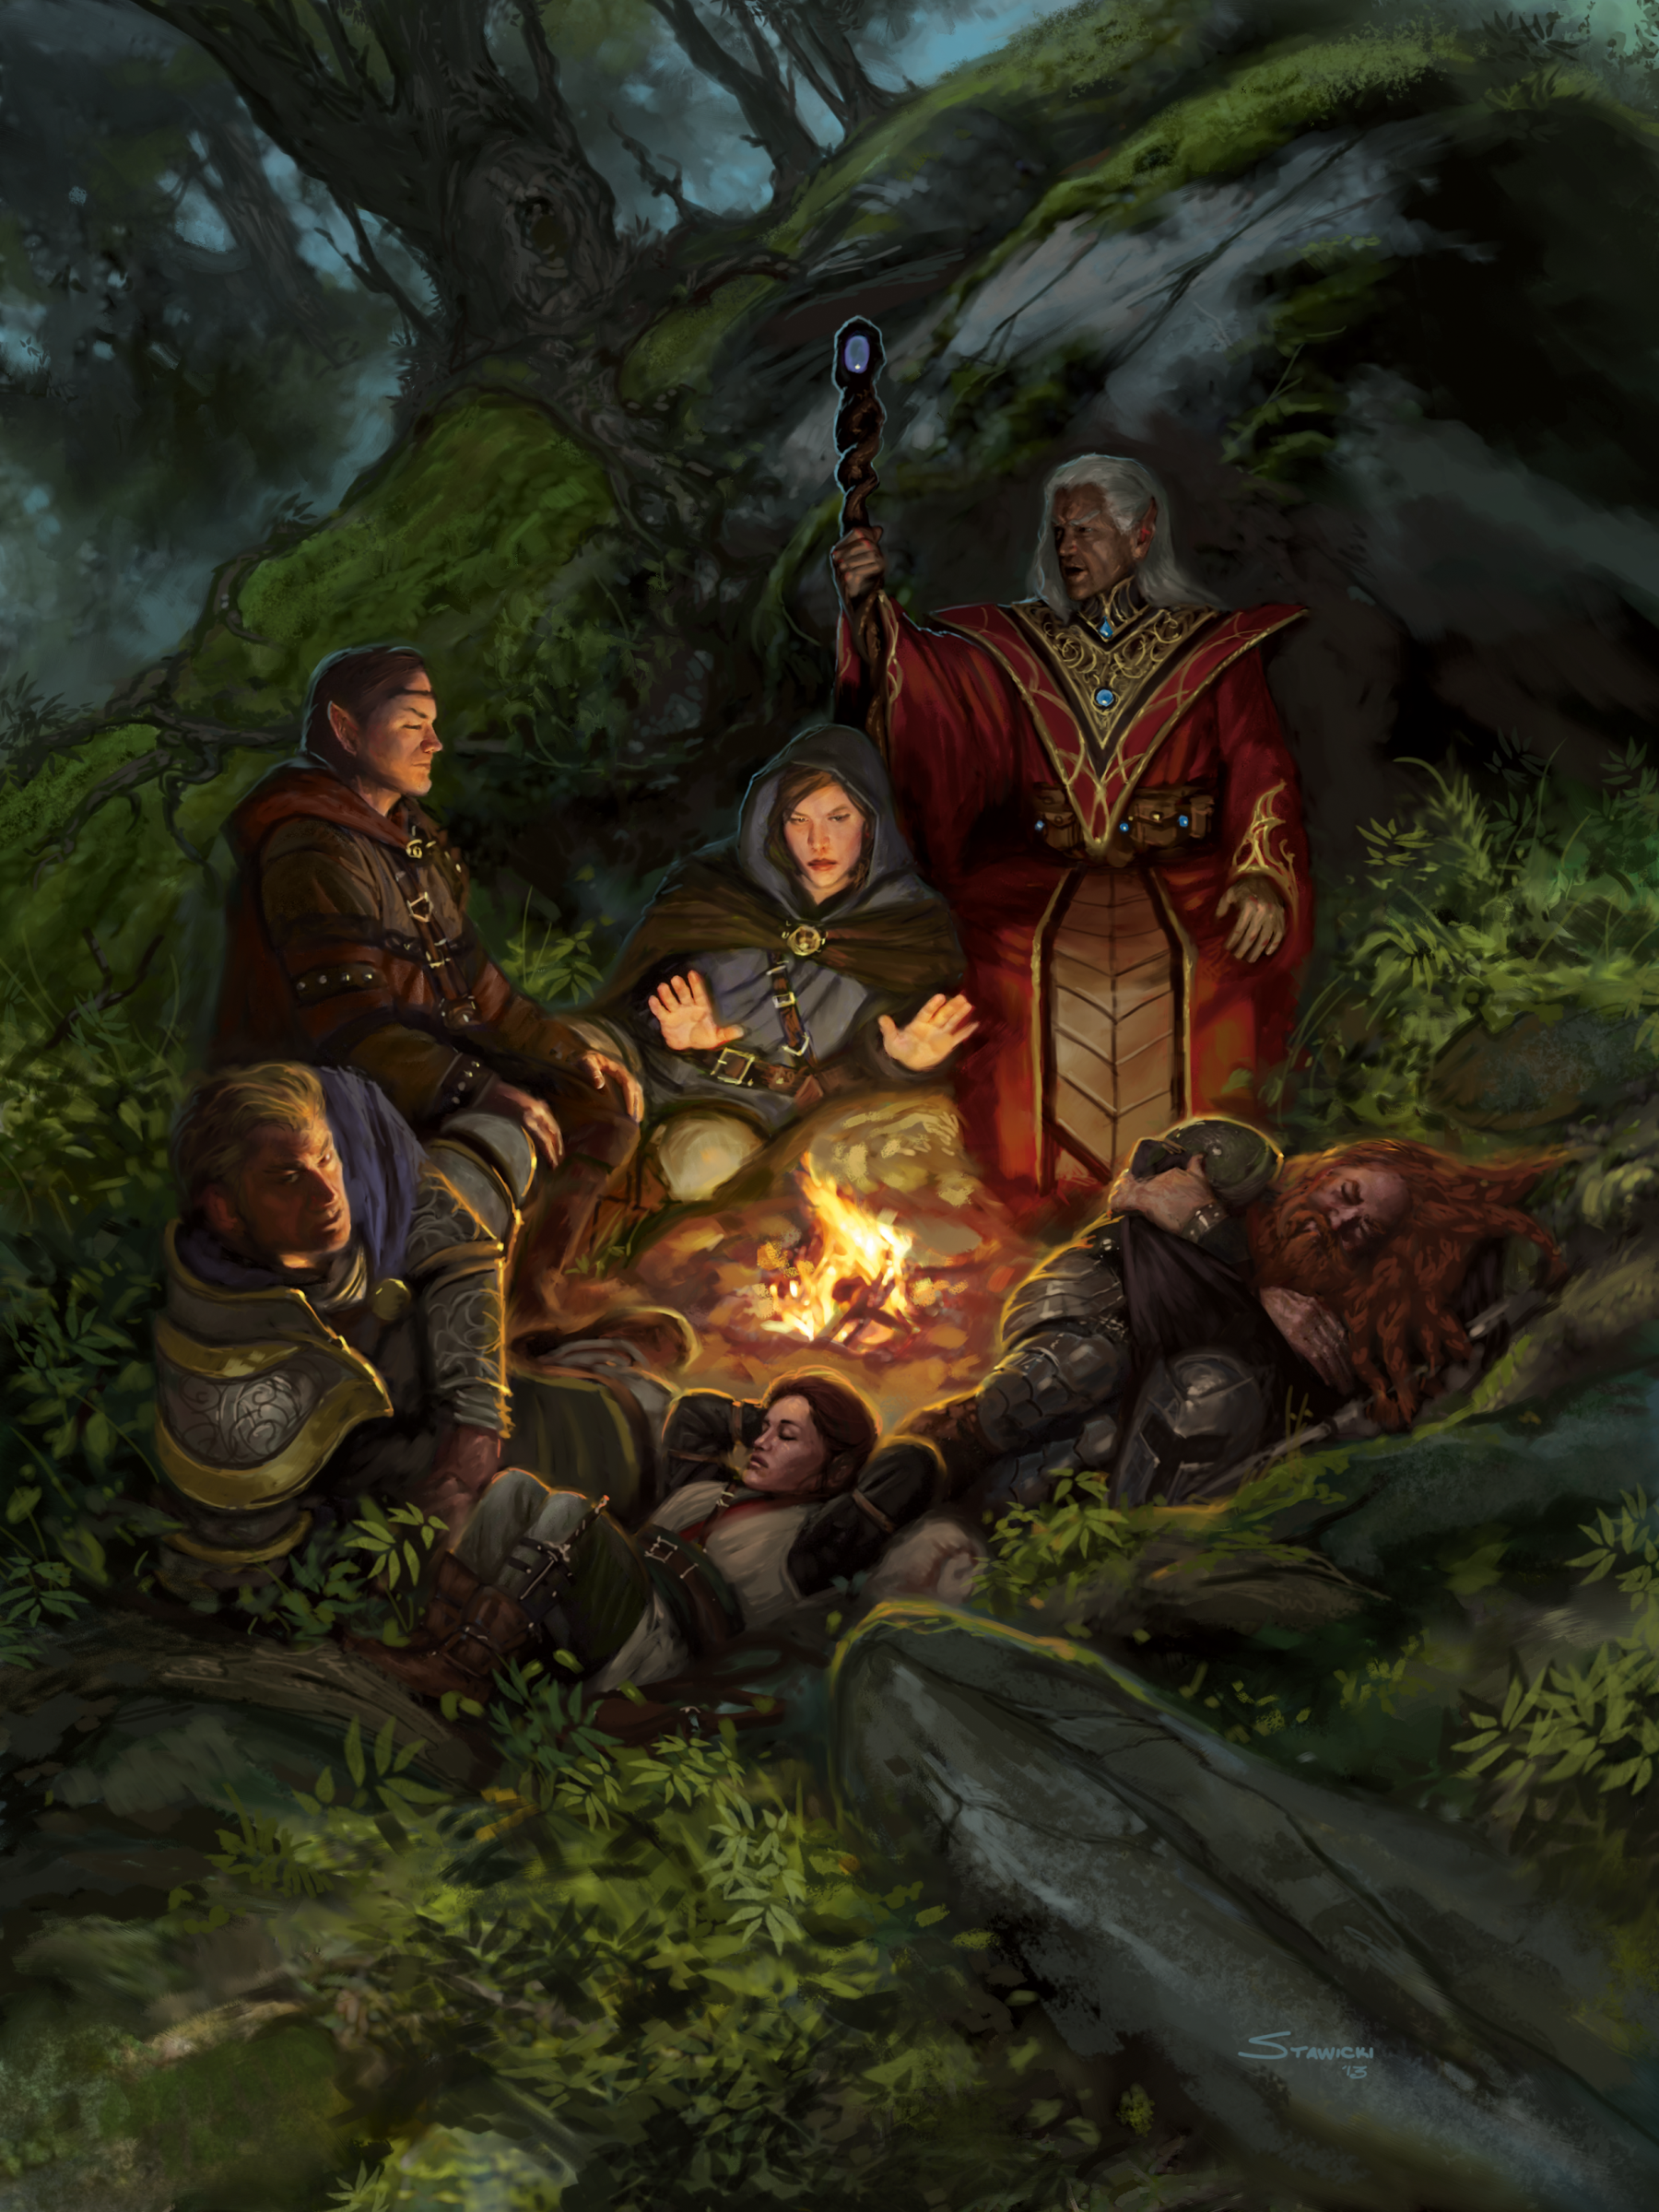 An image of some Dungeons and Dragons characters gathered round a campfire in a forest